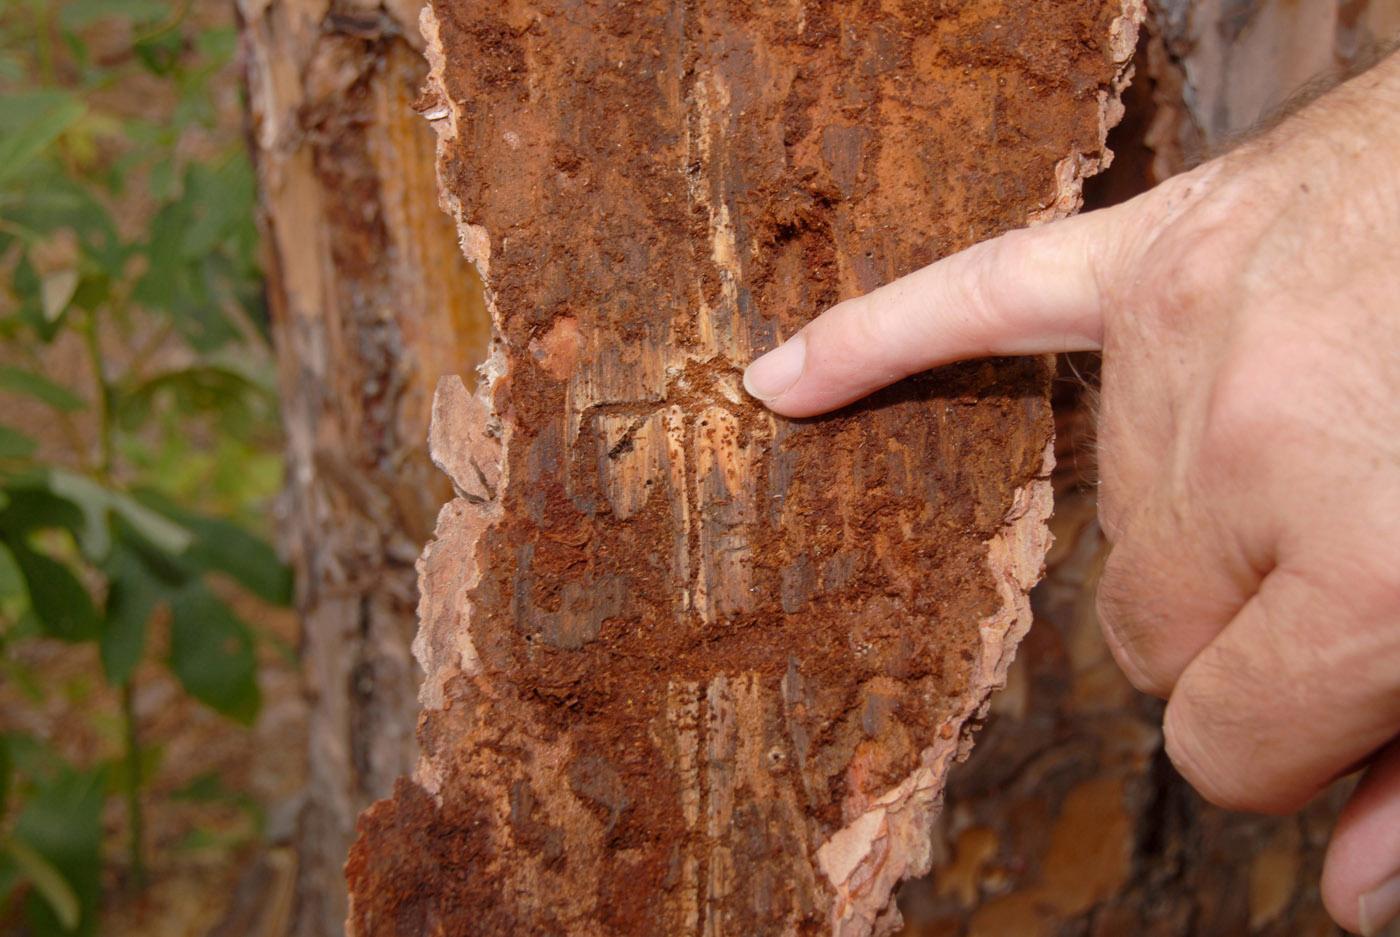 Pine bark beetles taking advantage of drought  Mississippi State  University Extension Service